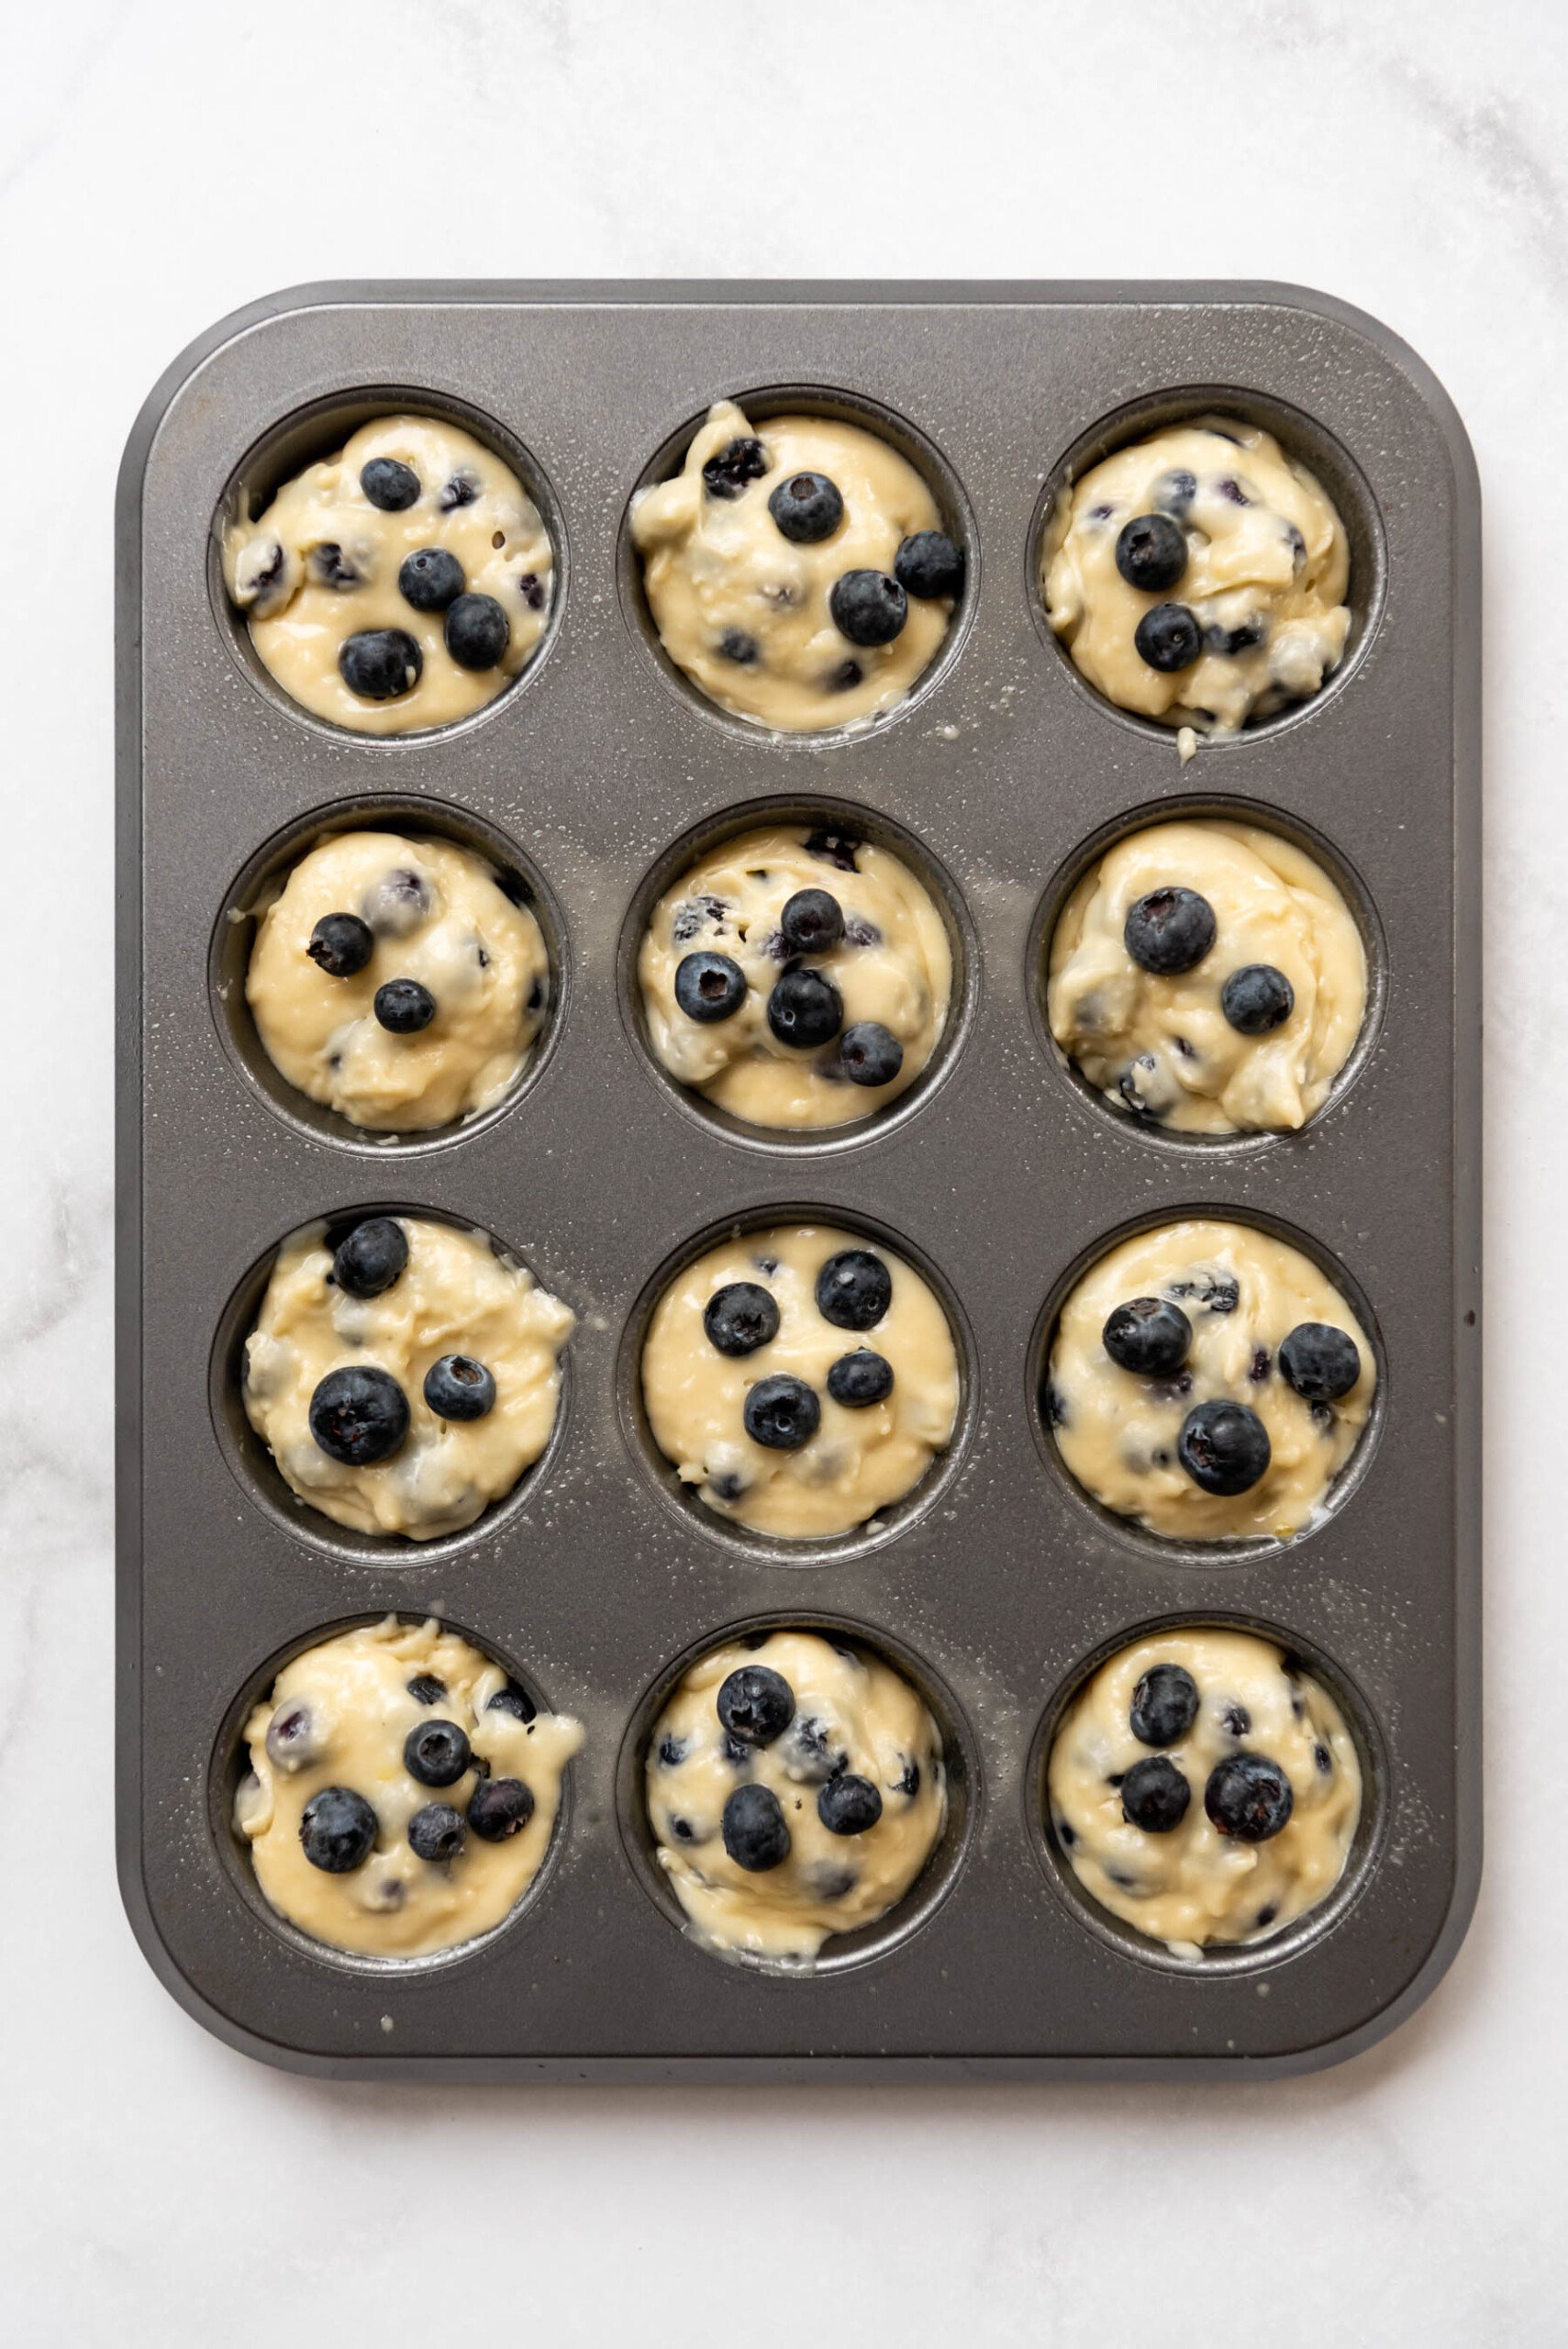 A 12-count muffin pan filled with blueberry muffin batter.